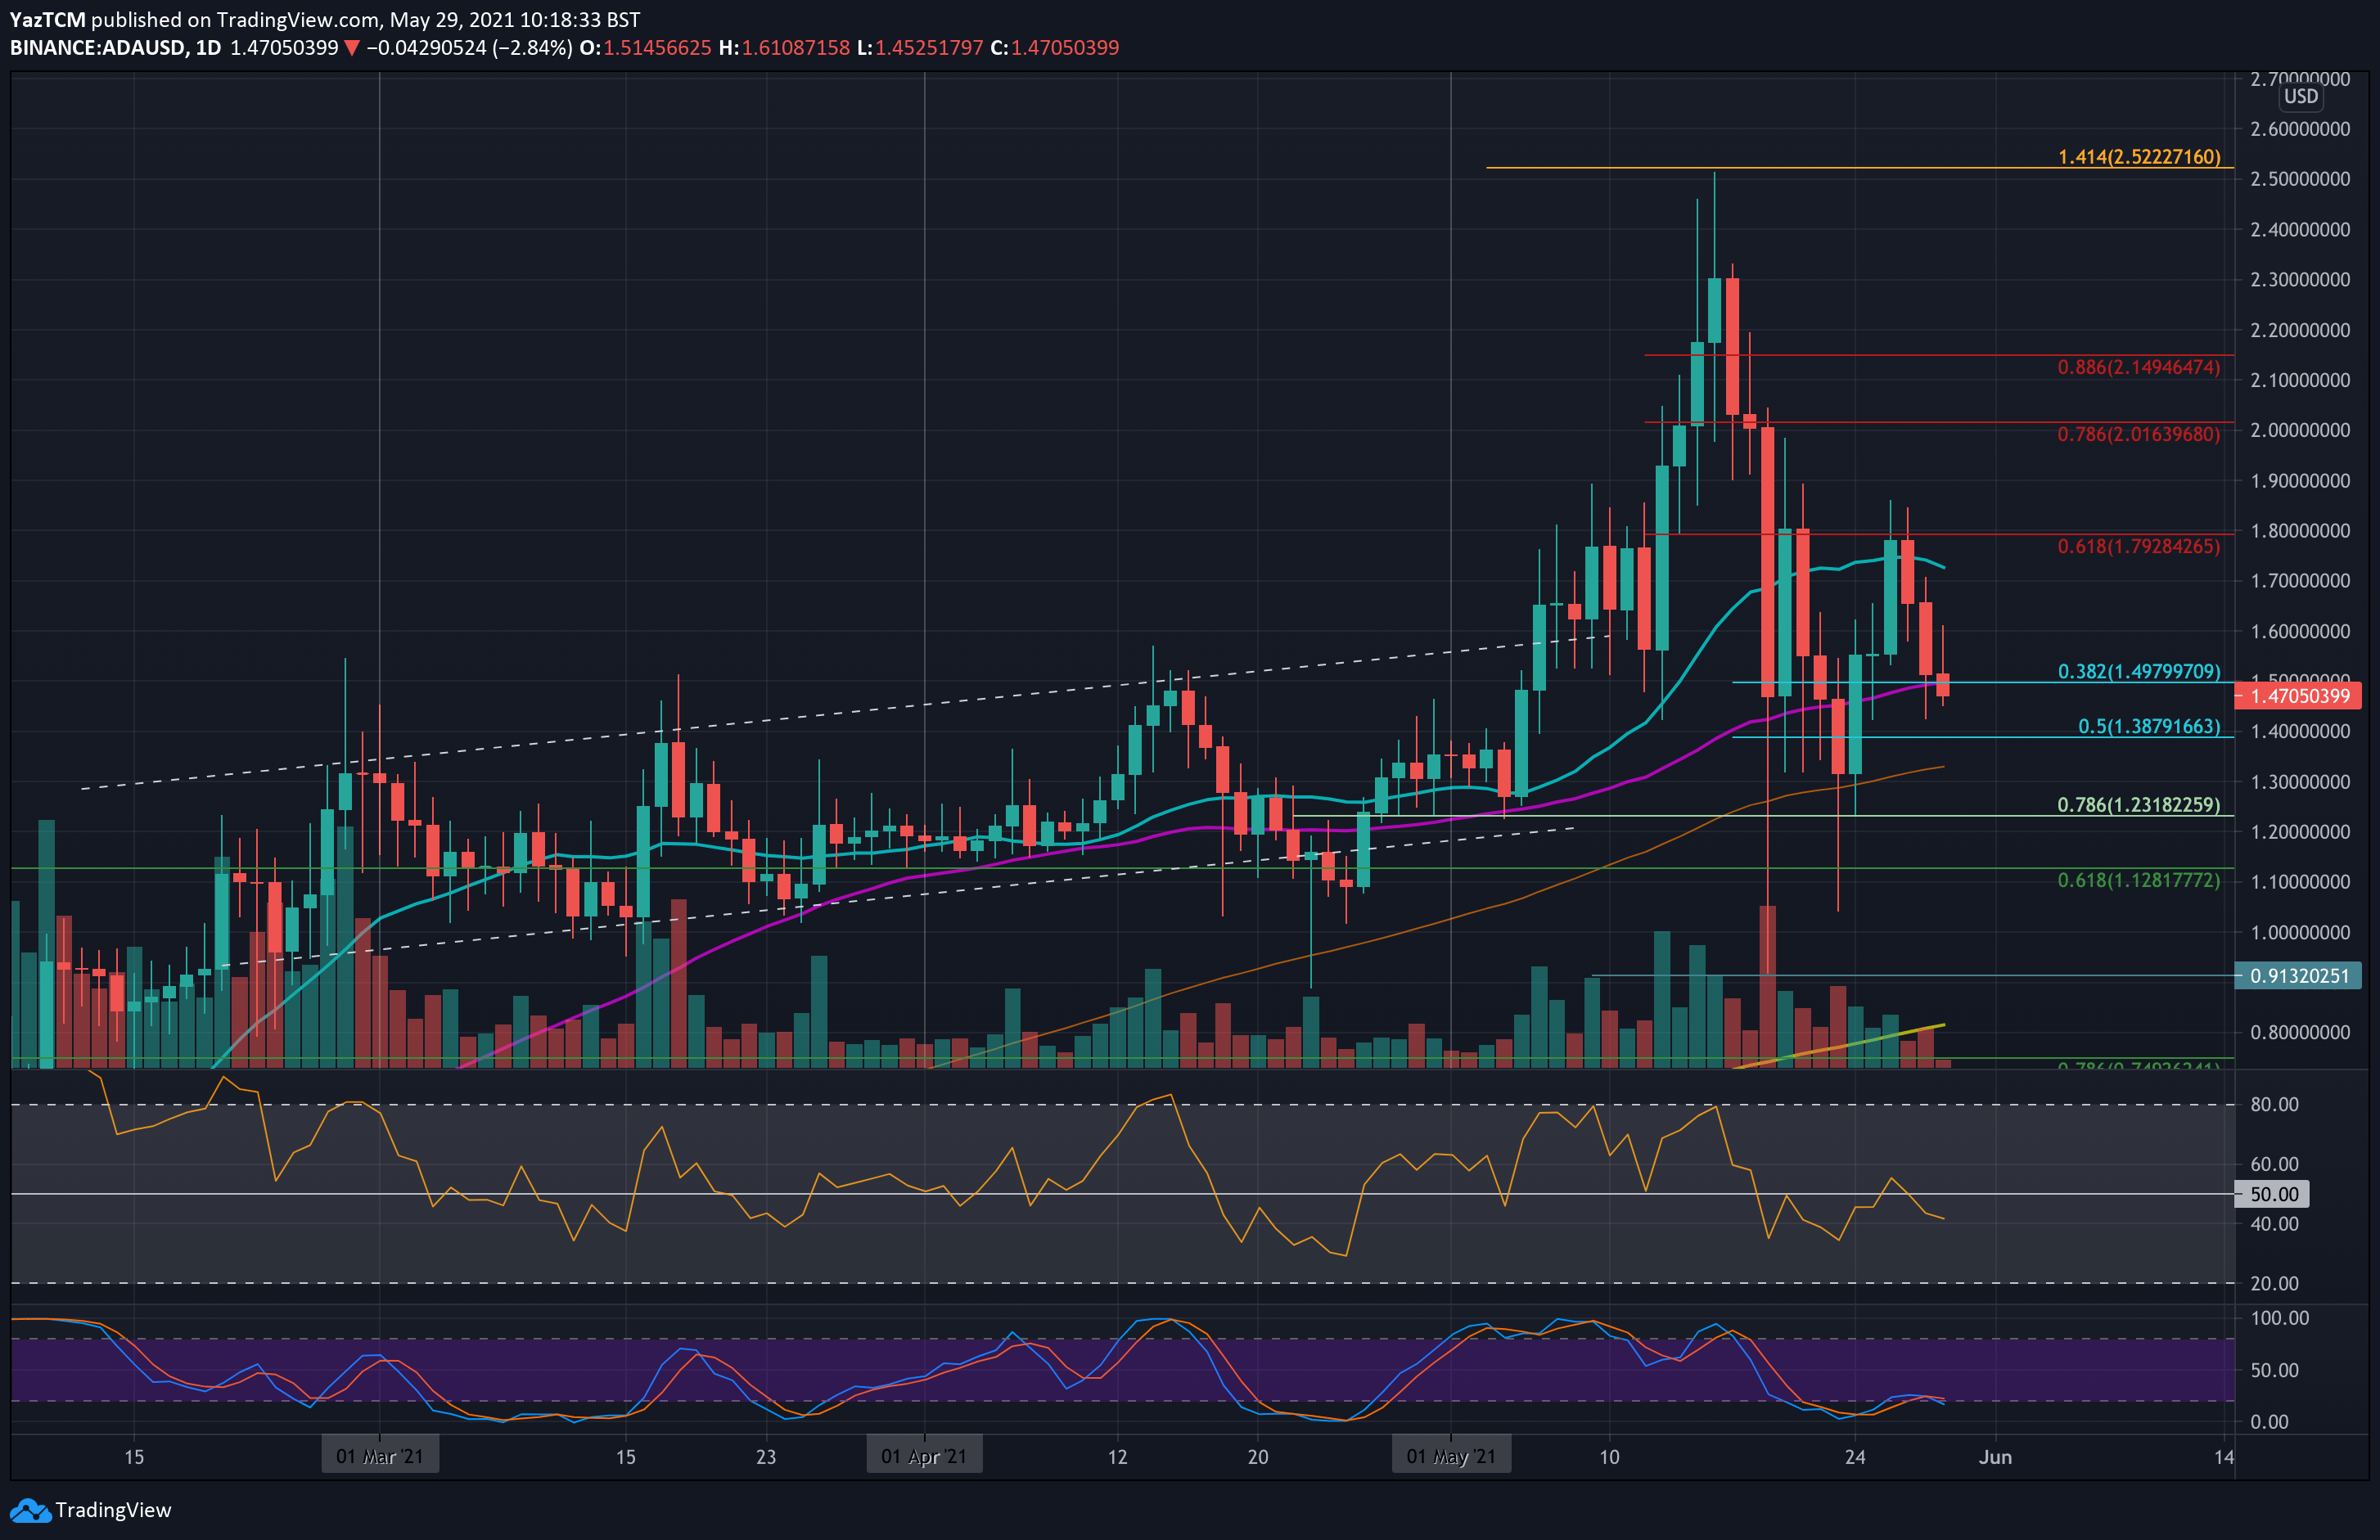 Cardano Price Analysis: ADA Struggles To Maintain The Critical $1.50, What’s Next?